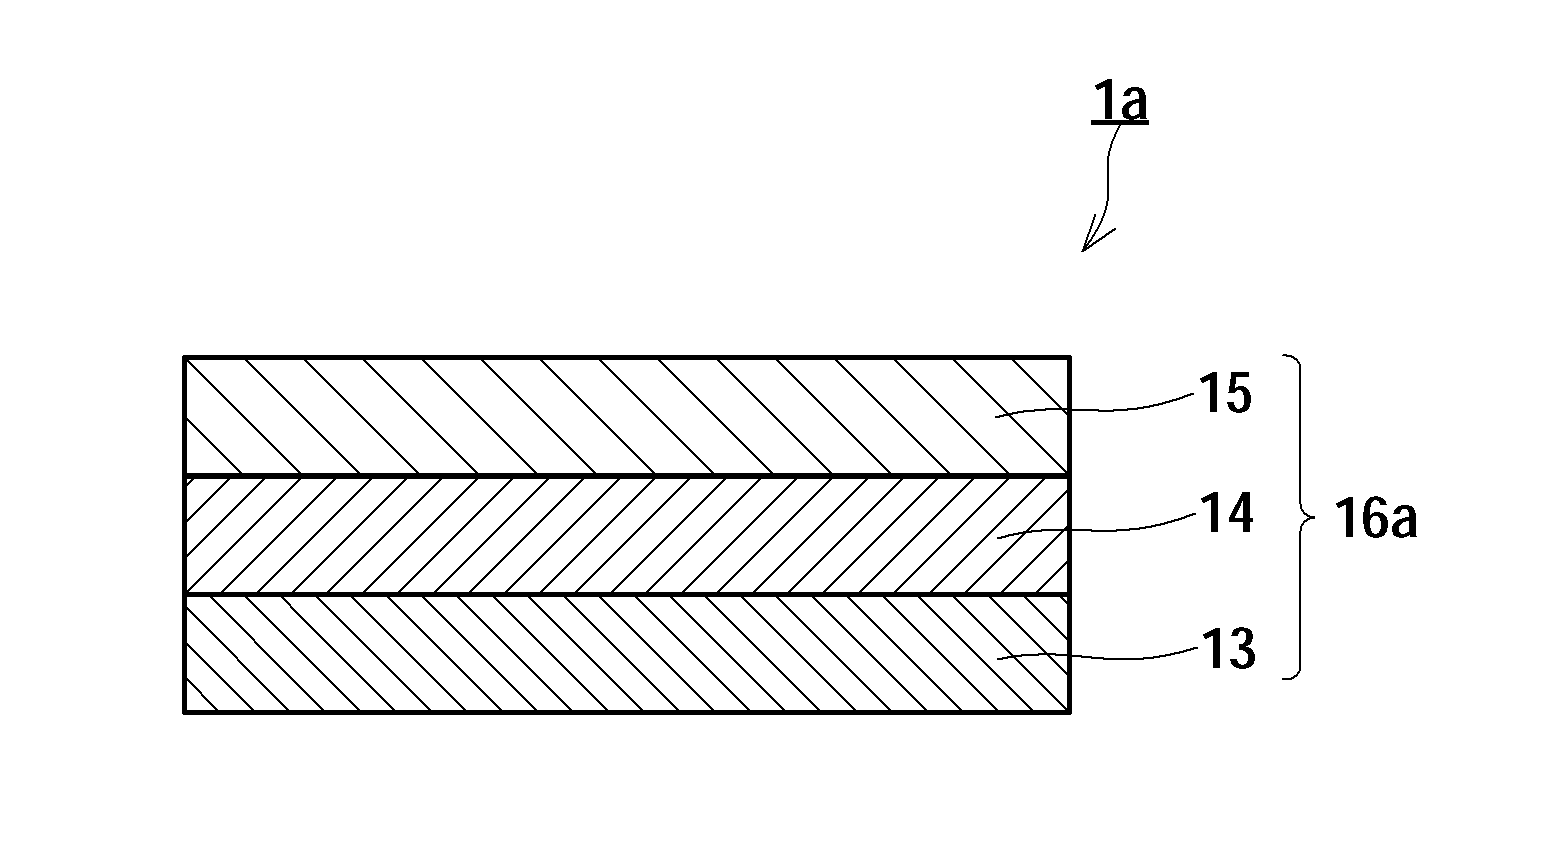 Piezoelectric thin film and method of manufacturing the same, ink jet head, method of forming image with the ink jet head, angular velocity sensor, method of measuring angular velocity with the angular velocity sensor, piezoelectric generating element, and method of generating electric power with the piezoelectric generating element